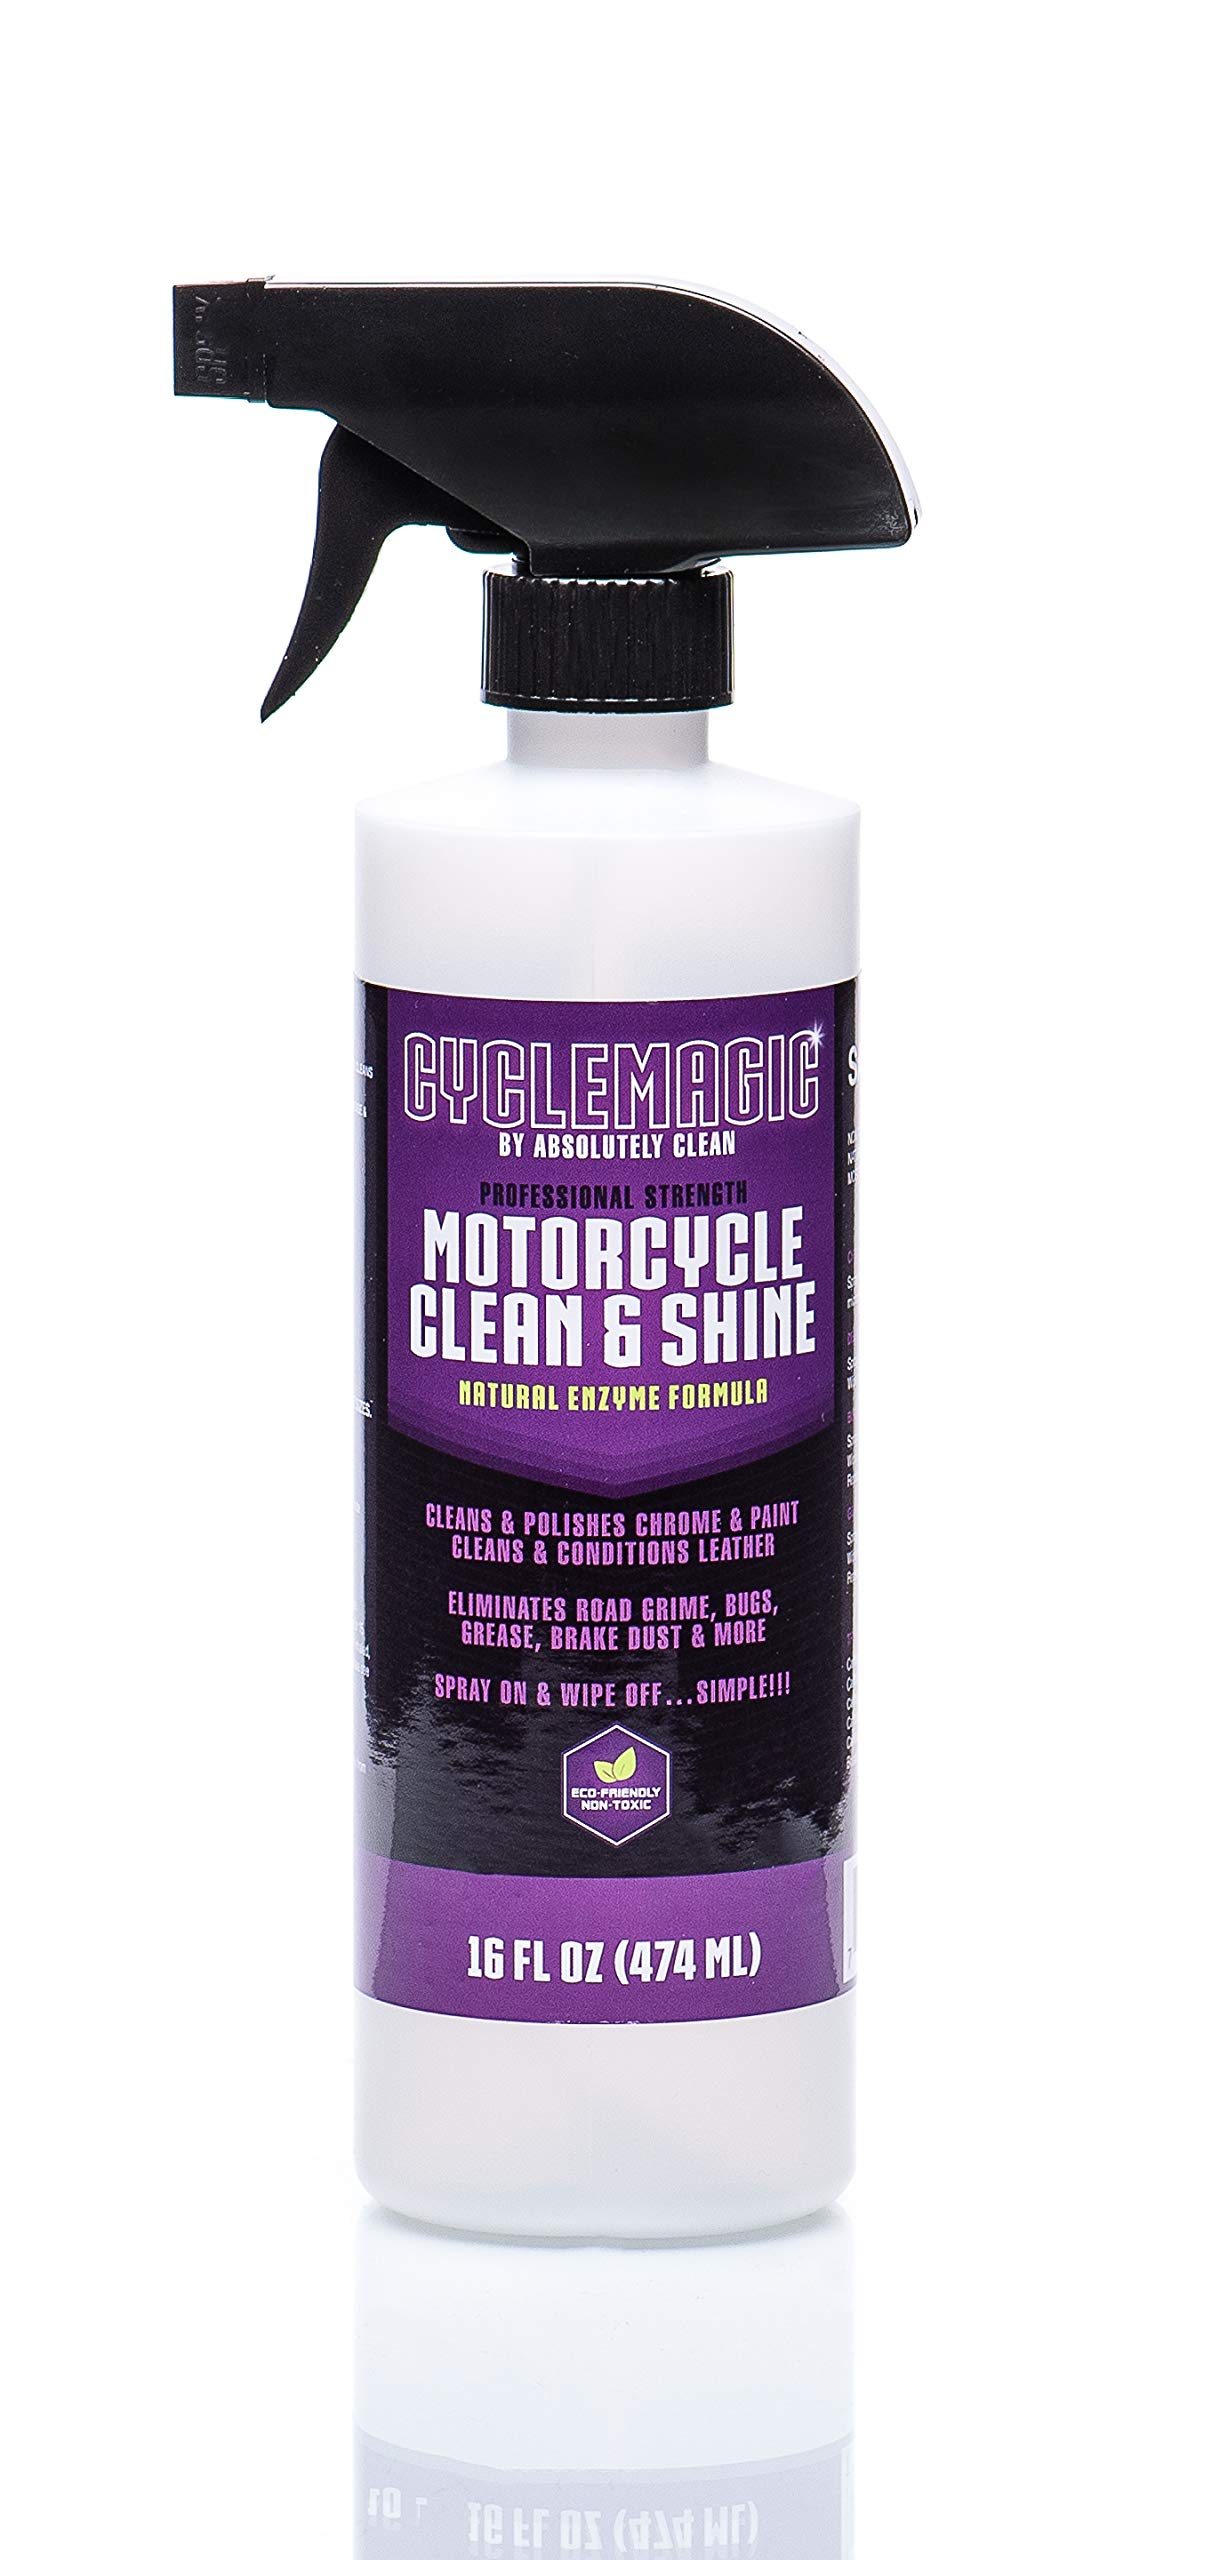 Cyclemagic Motorcycle Clean and Shine - Motorcycle Cleaner & Conditioner | Chrome, Leather, Paint & More | Eliminates Grime, Brake Dust, Dirt & Debris